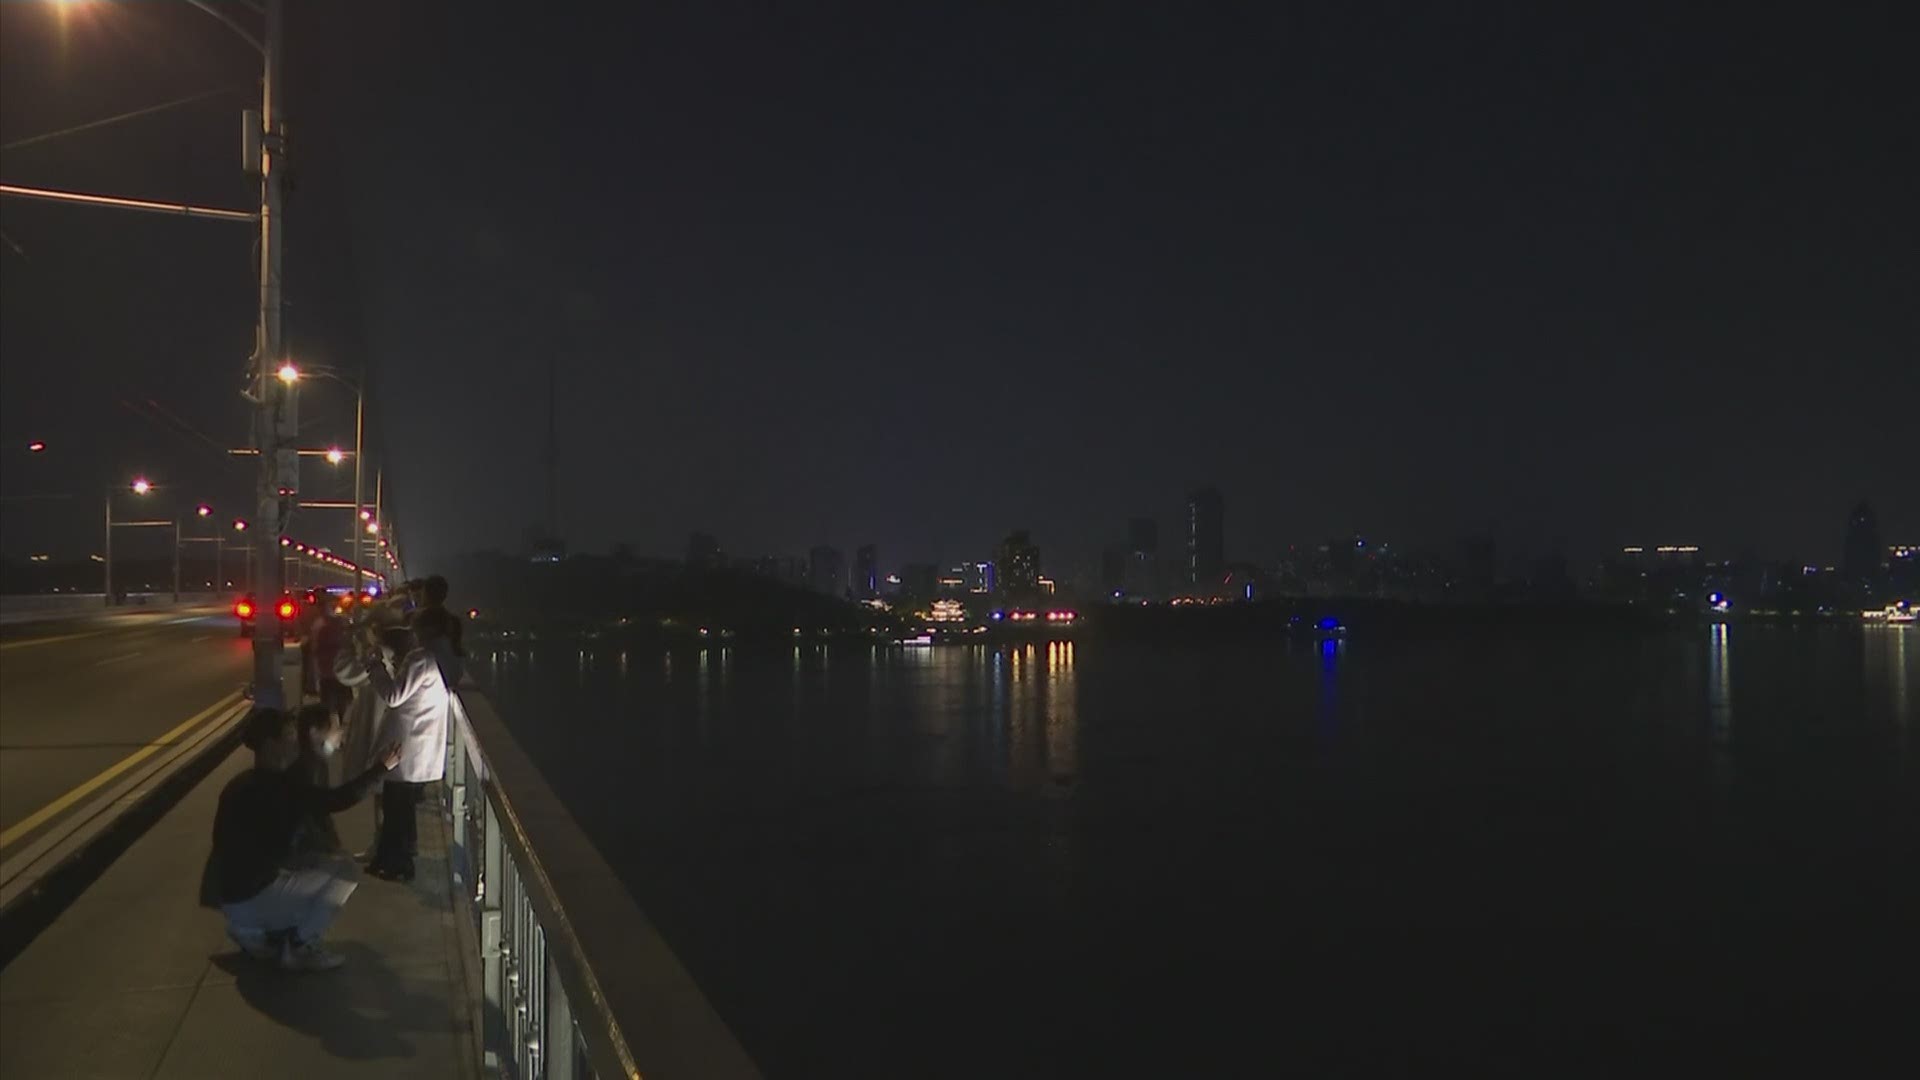 A light show illuminated the night sky in Wuhan to mark the end of a 76 day lockdown that served as a model for countries battling the coronavirus around the world.